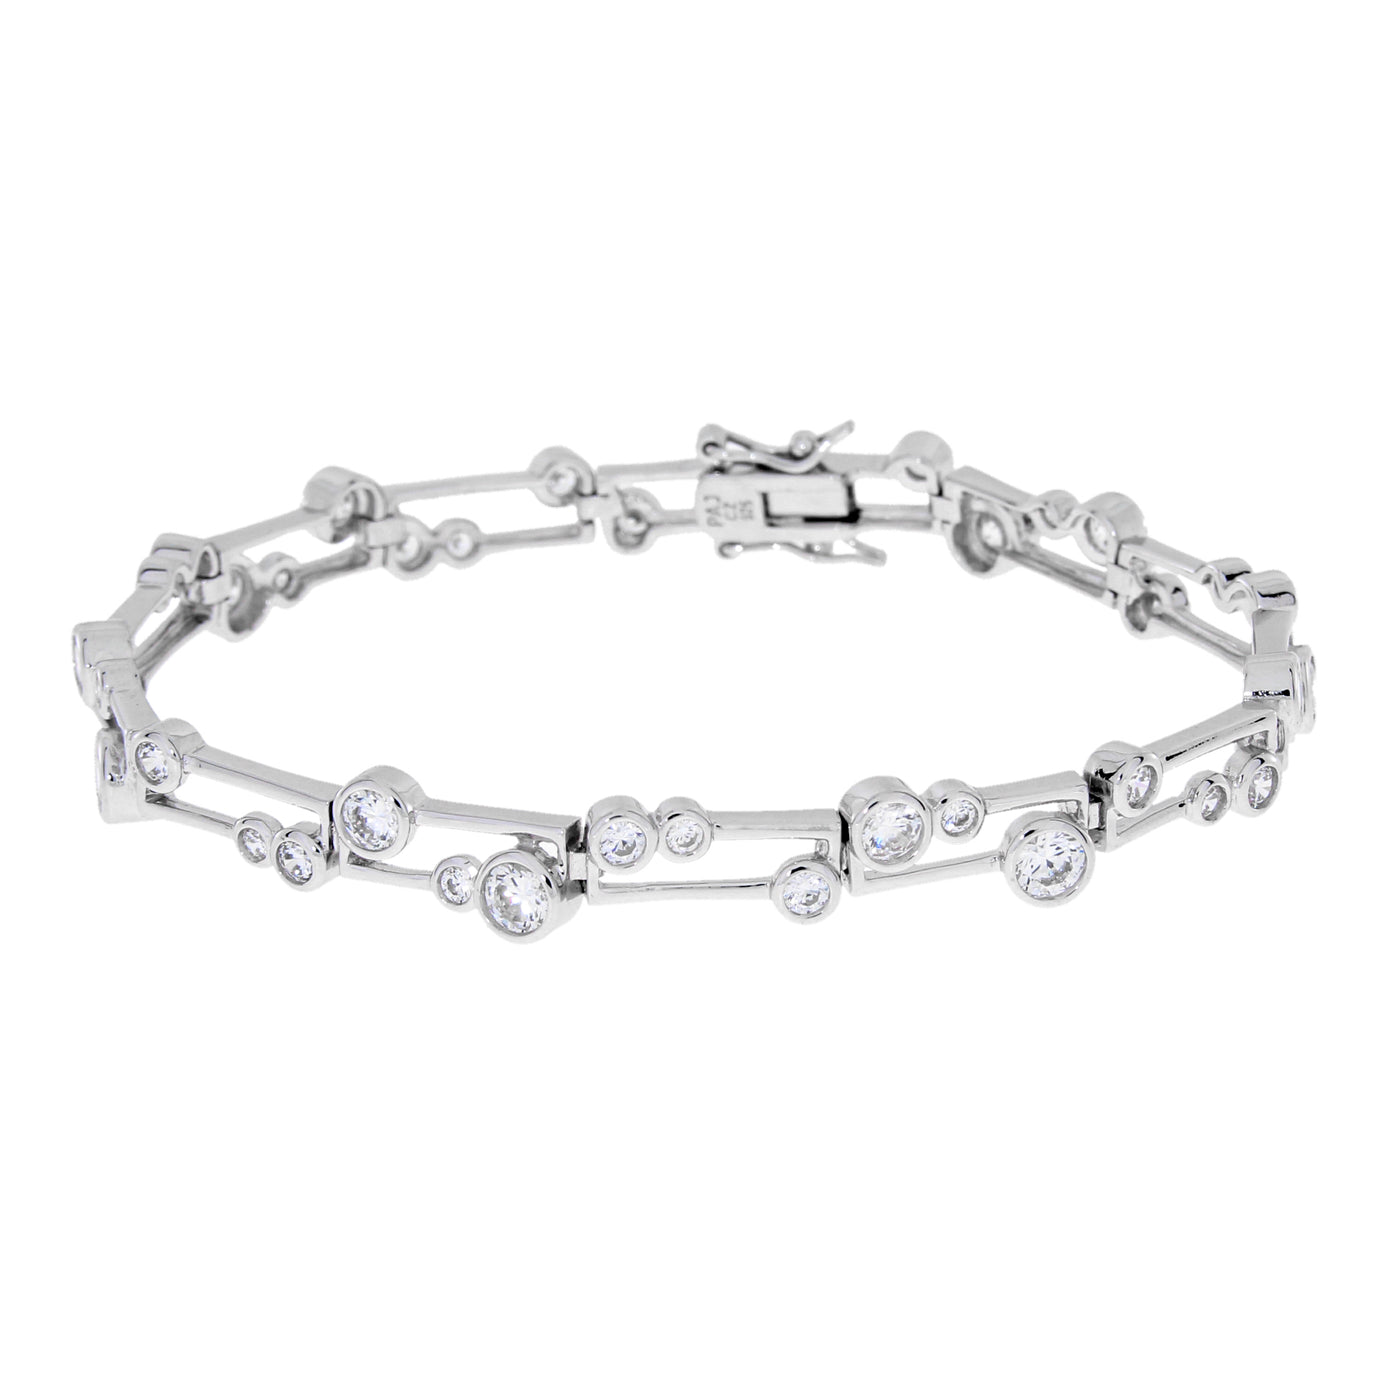 Geometric Link Sterling Silver And Cubic Zirconium Circle Bracelet